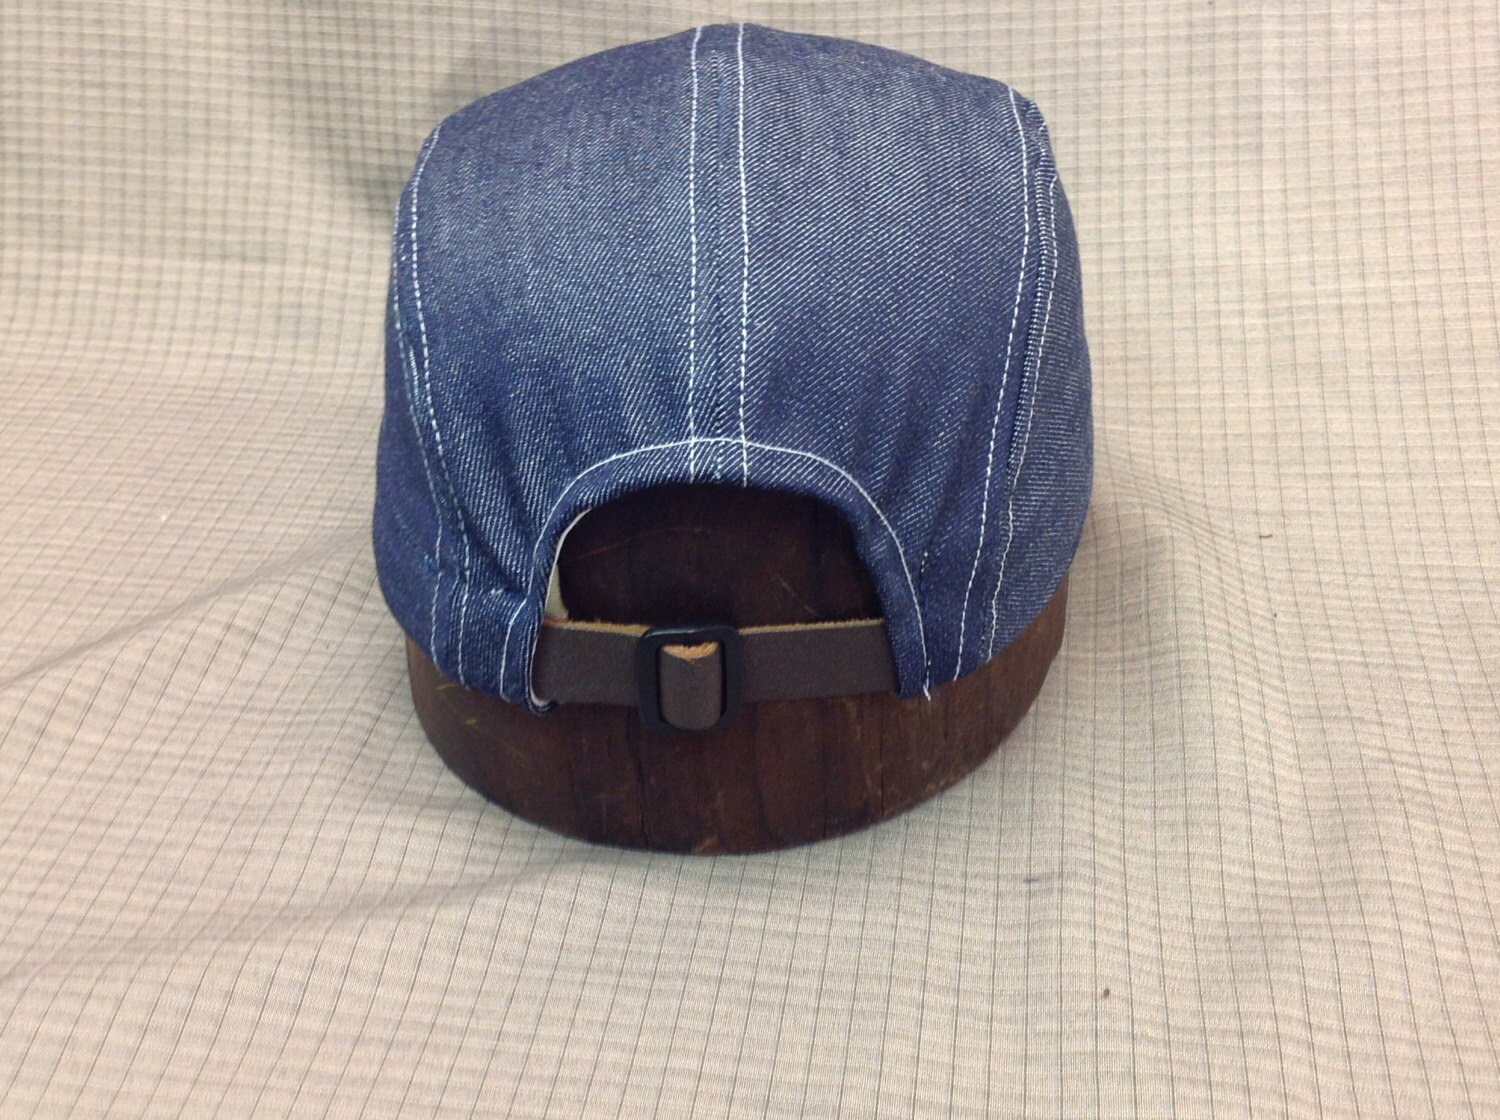 Denim 5 panel cap with short 19th century visor, adjustable or fitted